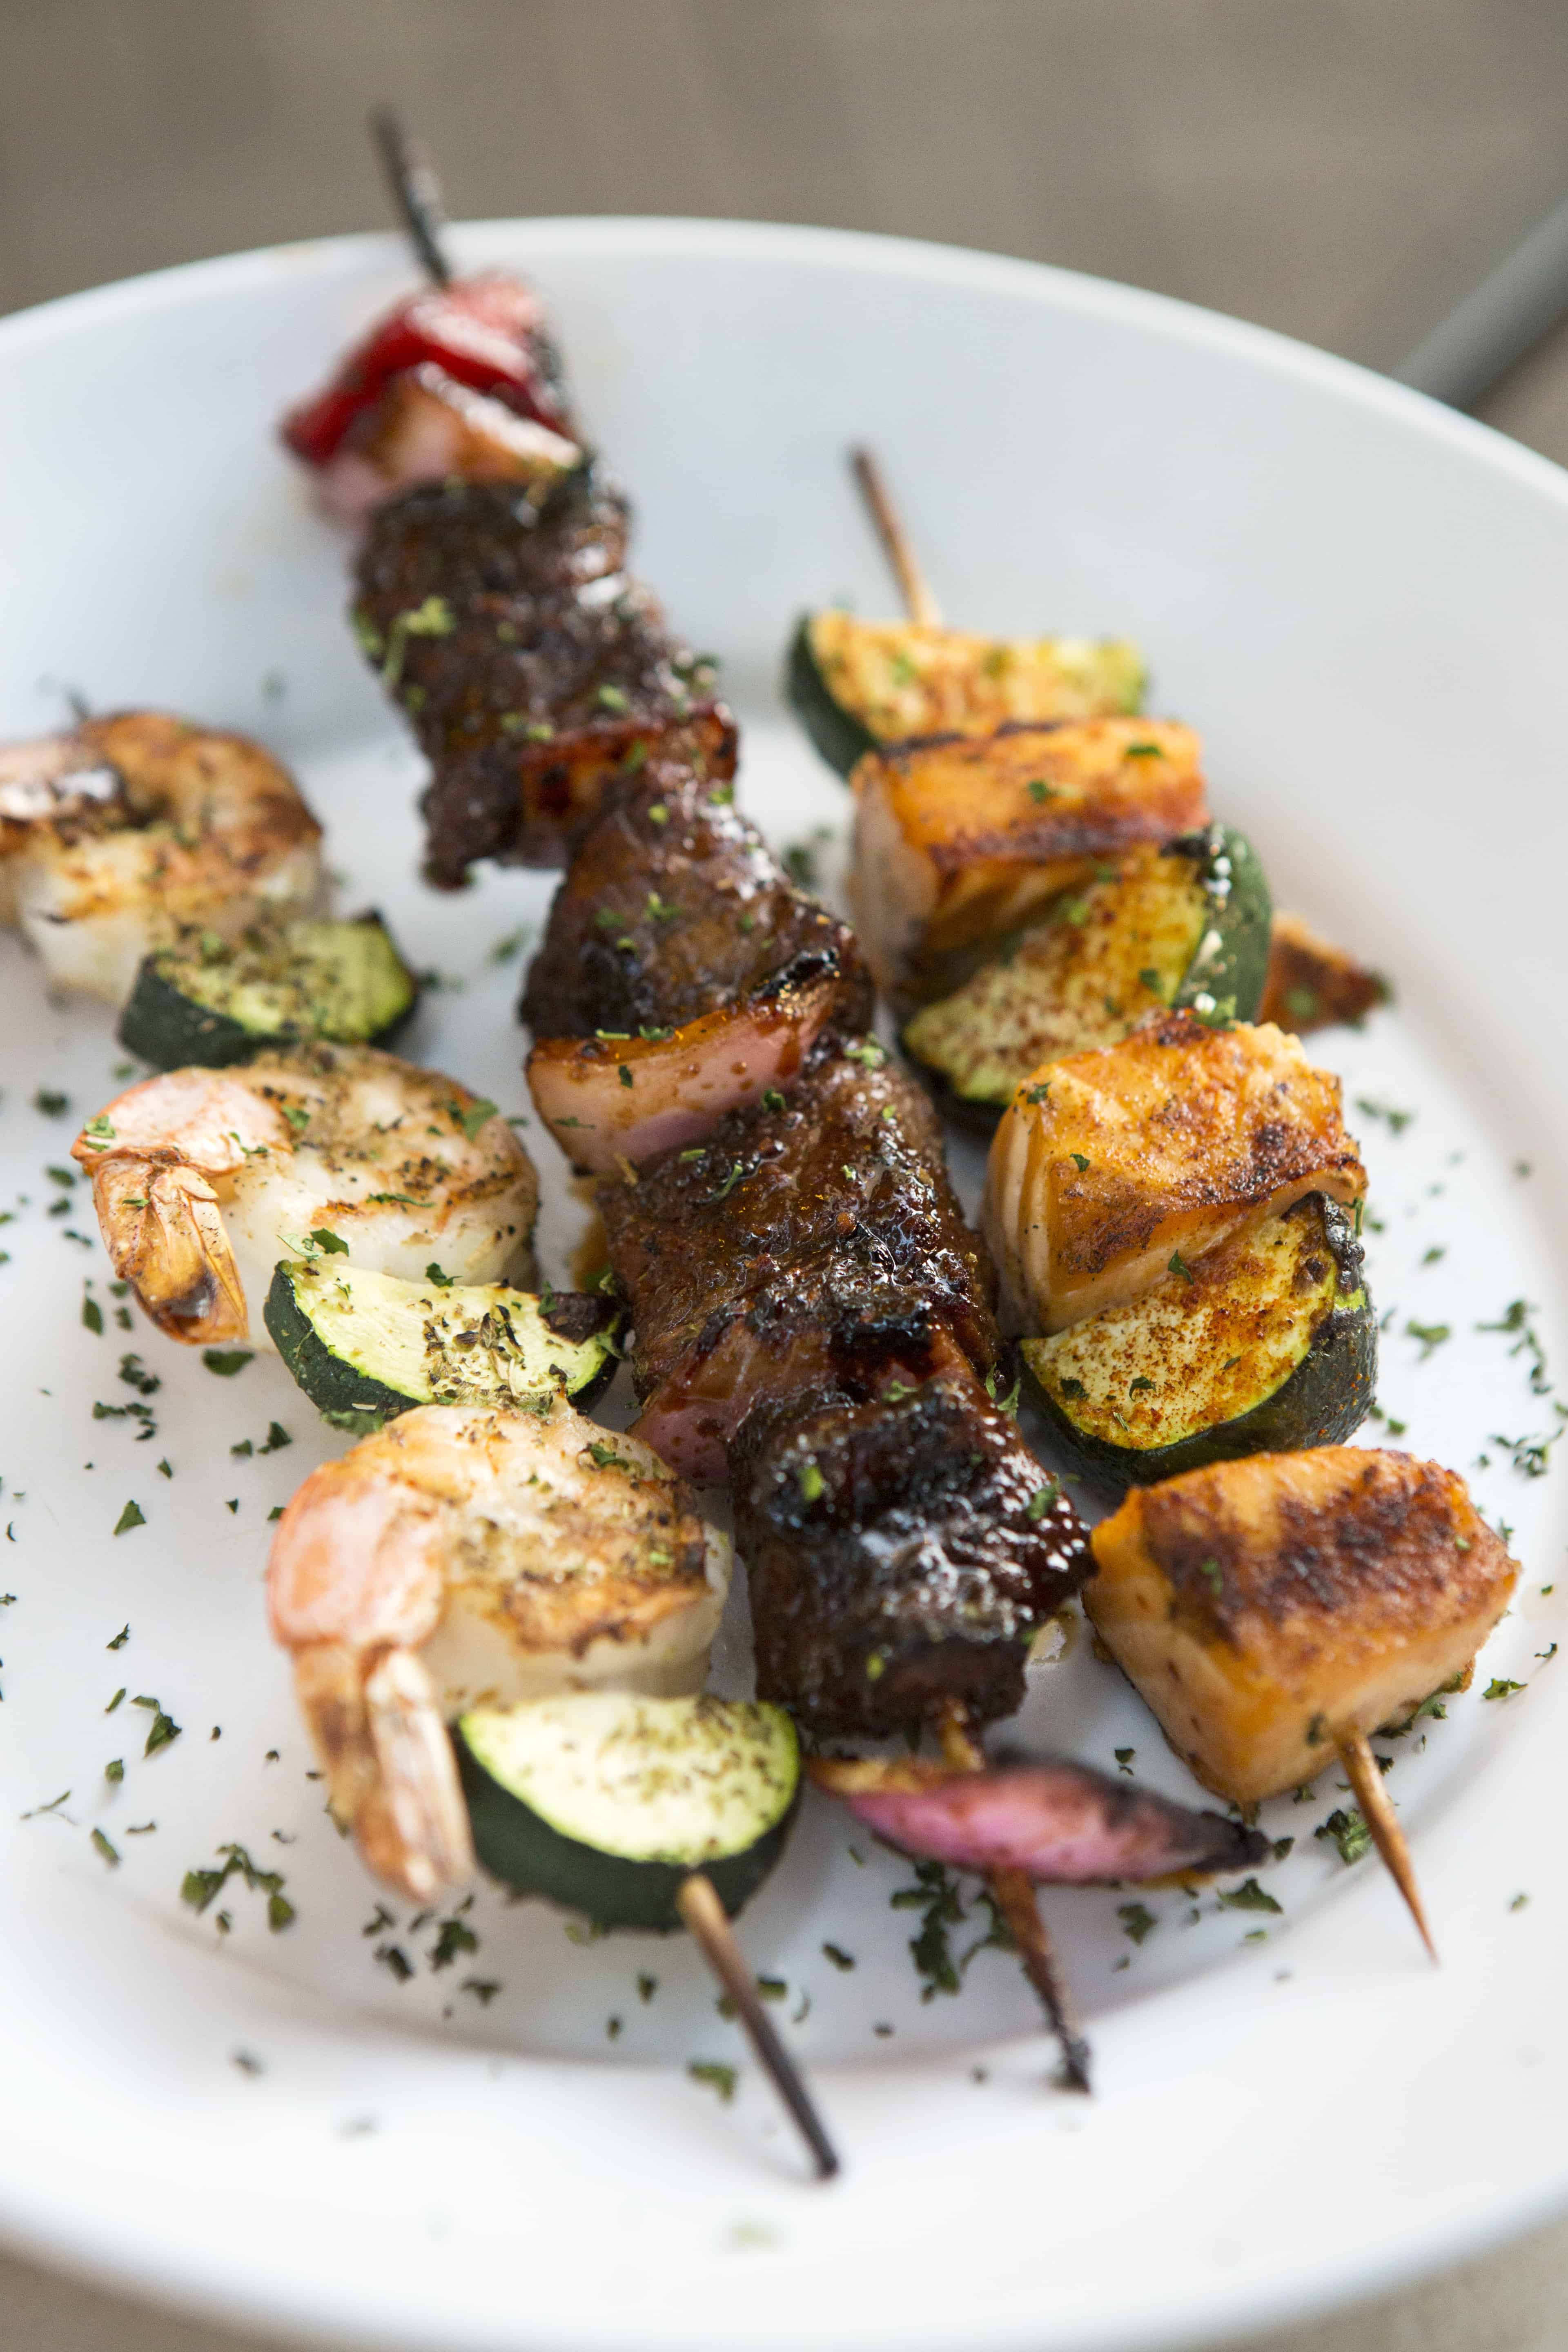 Mediterranean With A Southern Flair At Zoes Kitchen